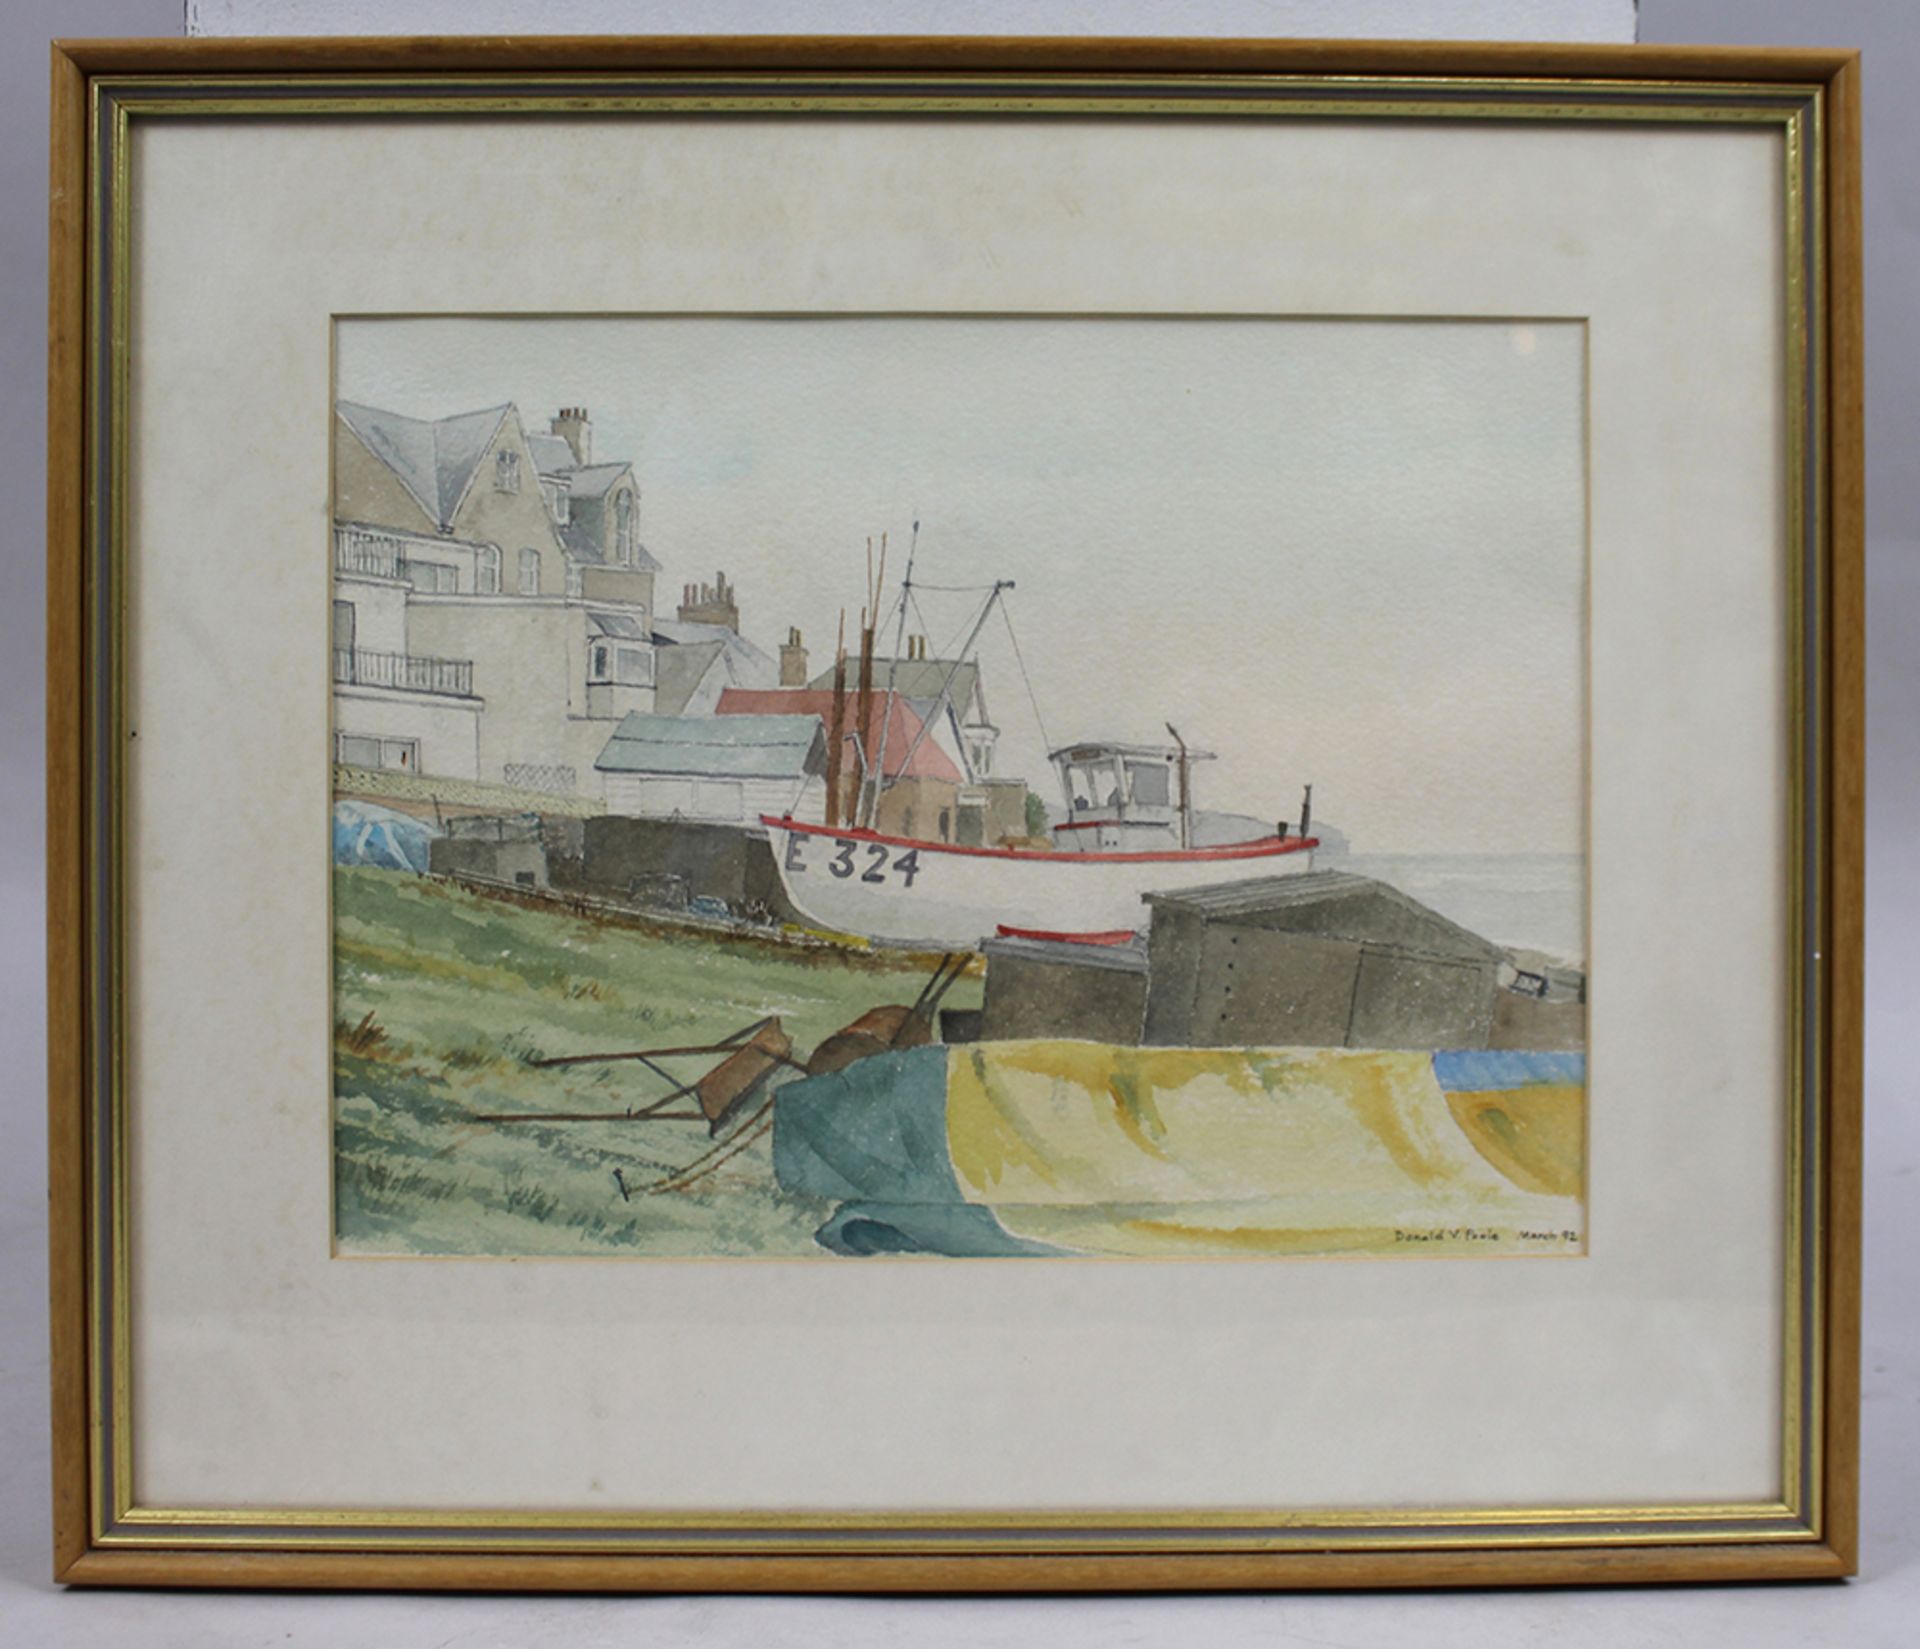 Watercolour of Budleigh Salterton by Donald Poole